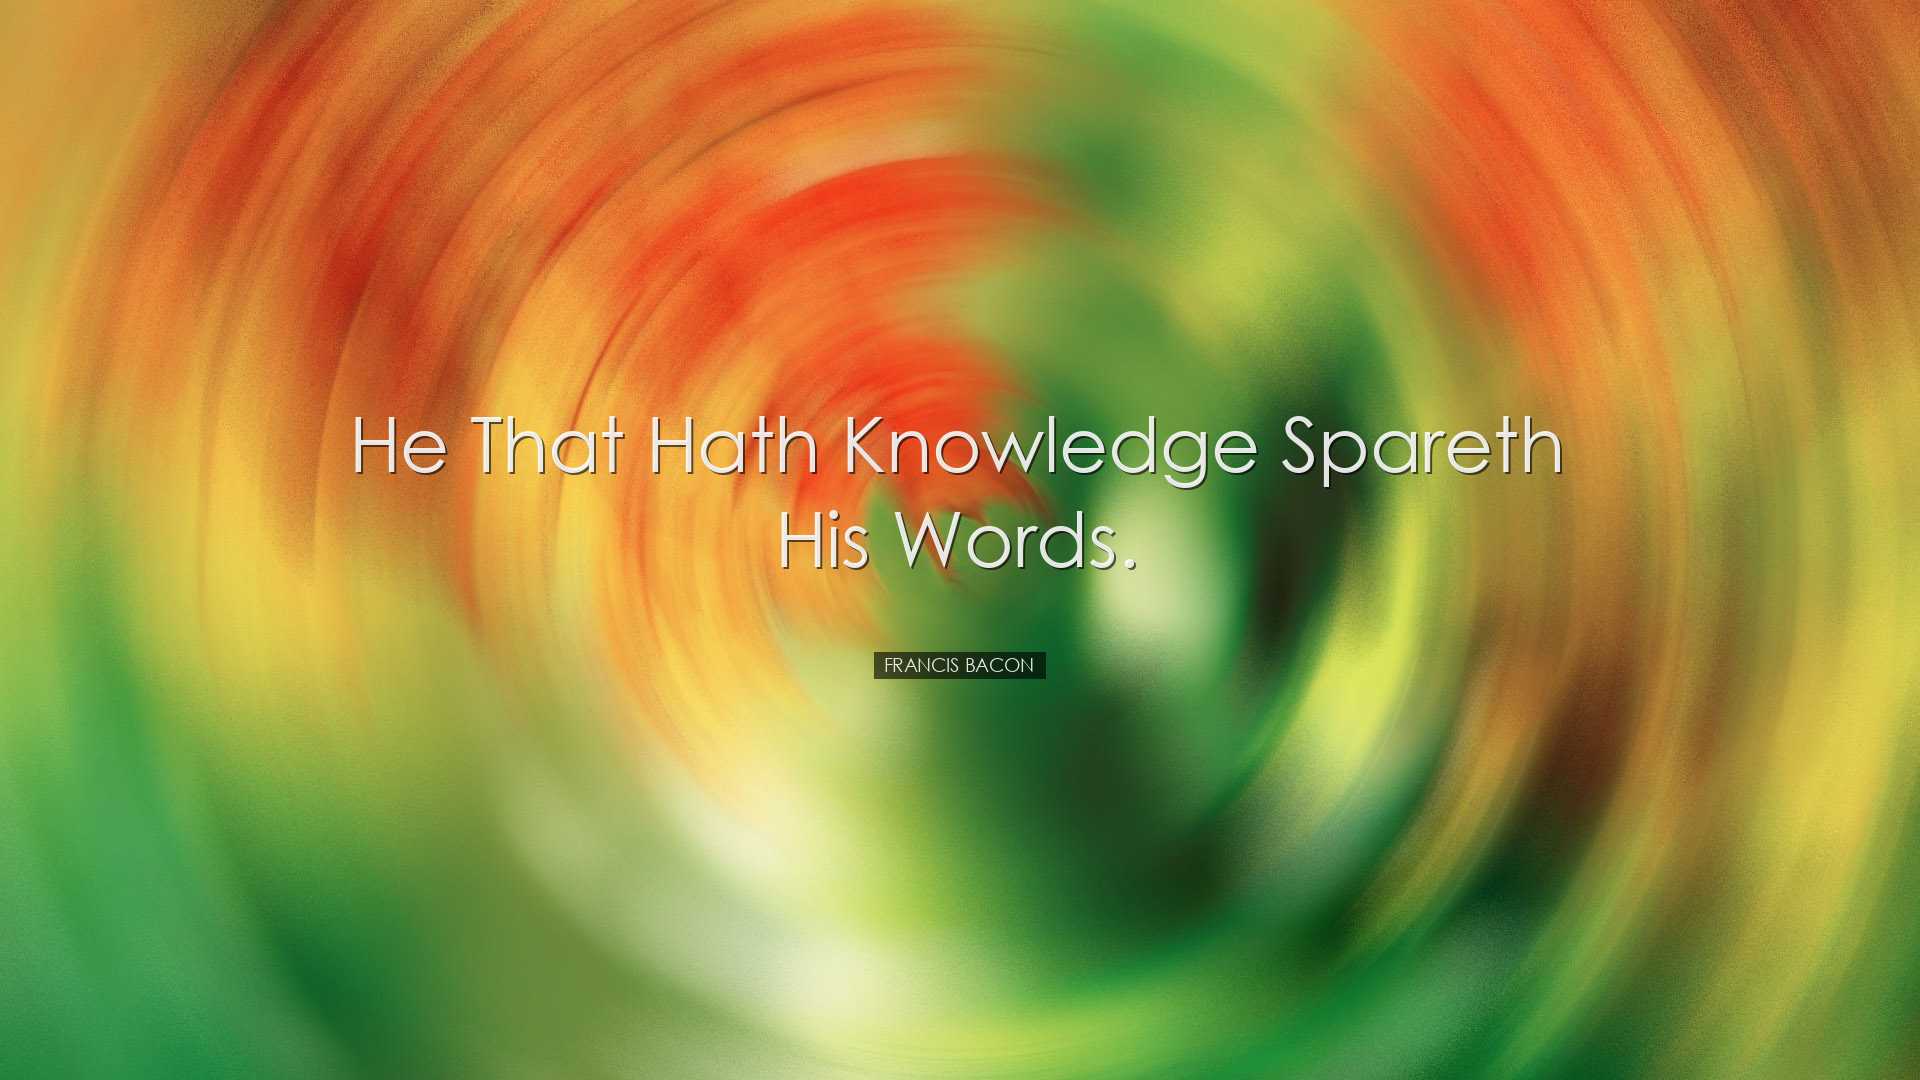 He that hath knowledge spareth his words. - Francis Bacon